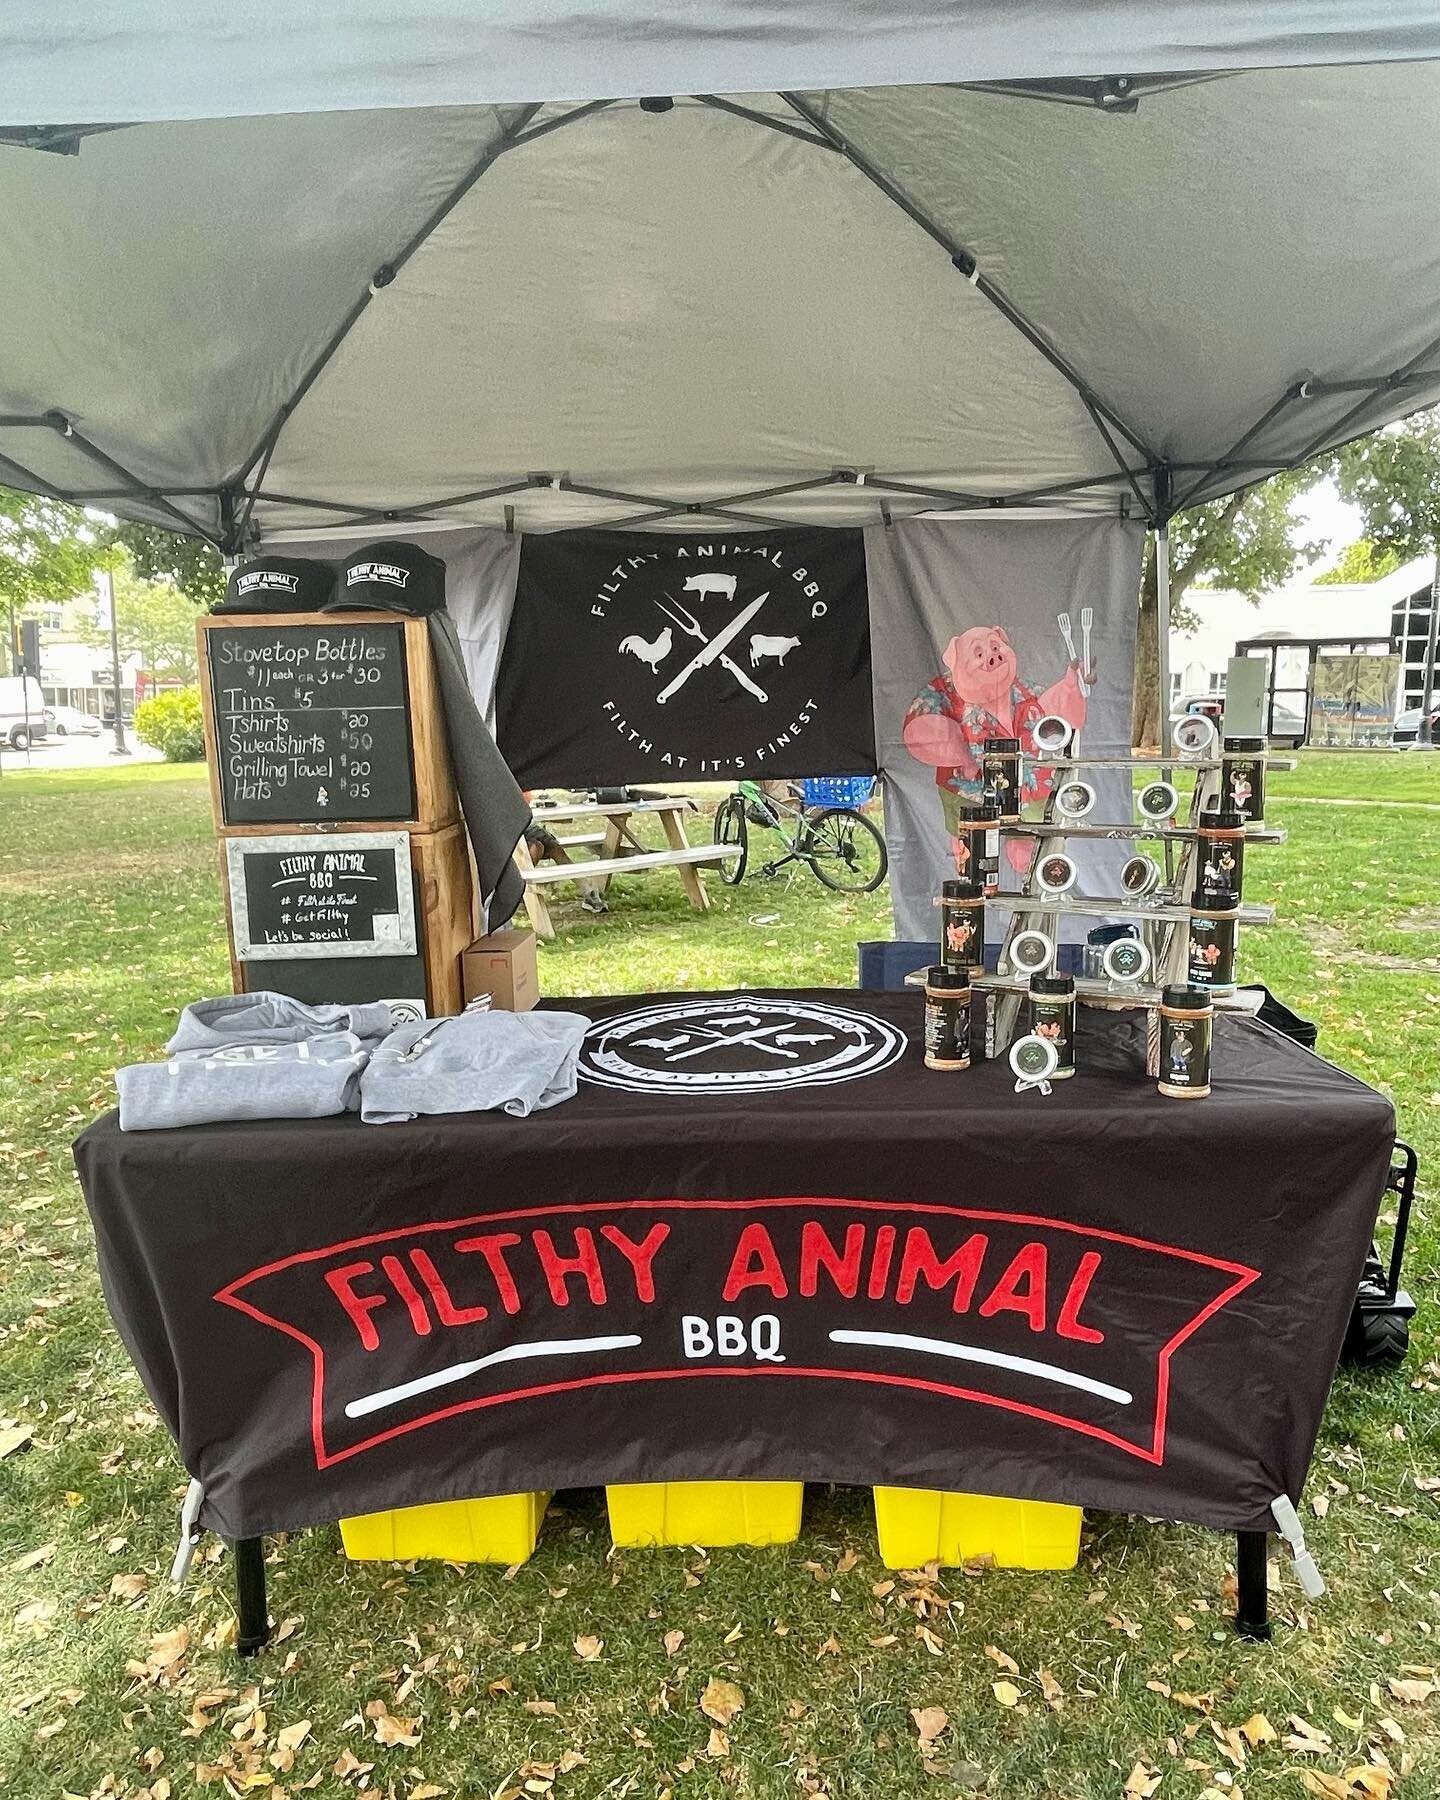 Norwood!!!! We are out here at the Norwood farmers market until 6! Come out and let us help you add a little filth to your life!!!

#filthatitsfinest
#filthyanimalbbq
#Getfilthy
#shoplocal 
#beef
#backyardbbq
#bbq
#food 
#foodporn 
#grill 
#barbecue 